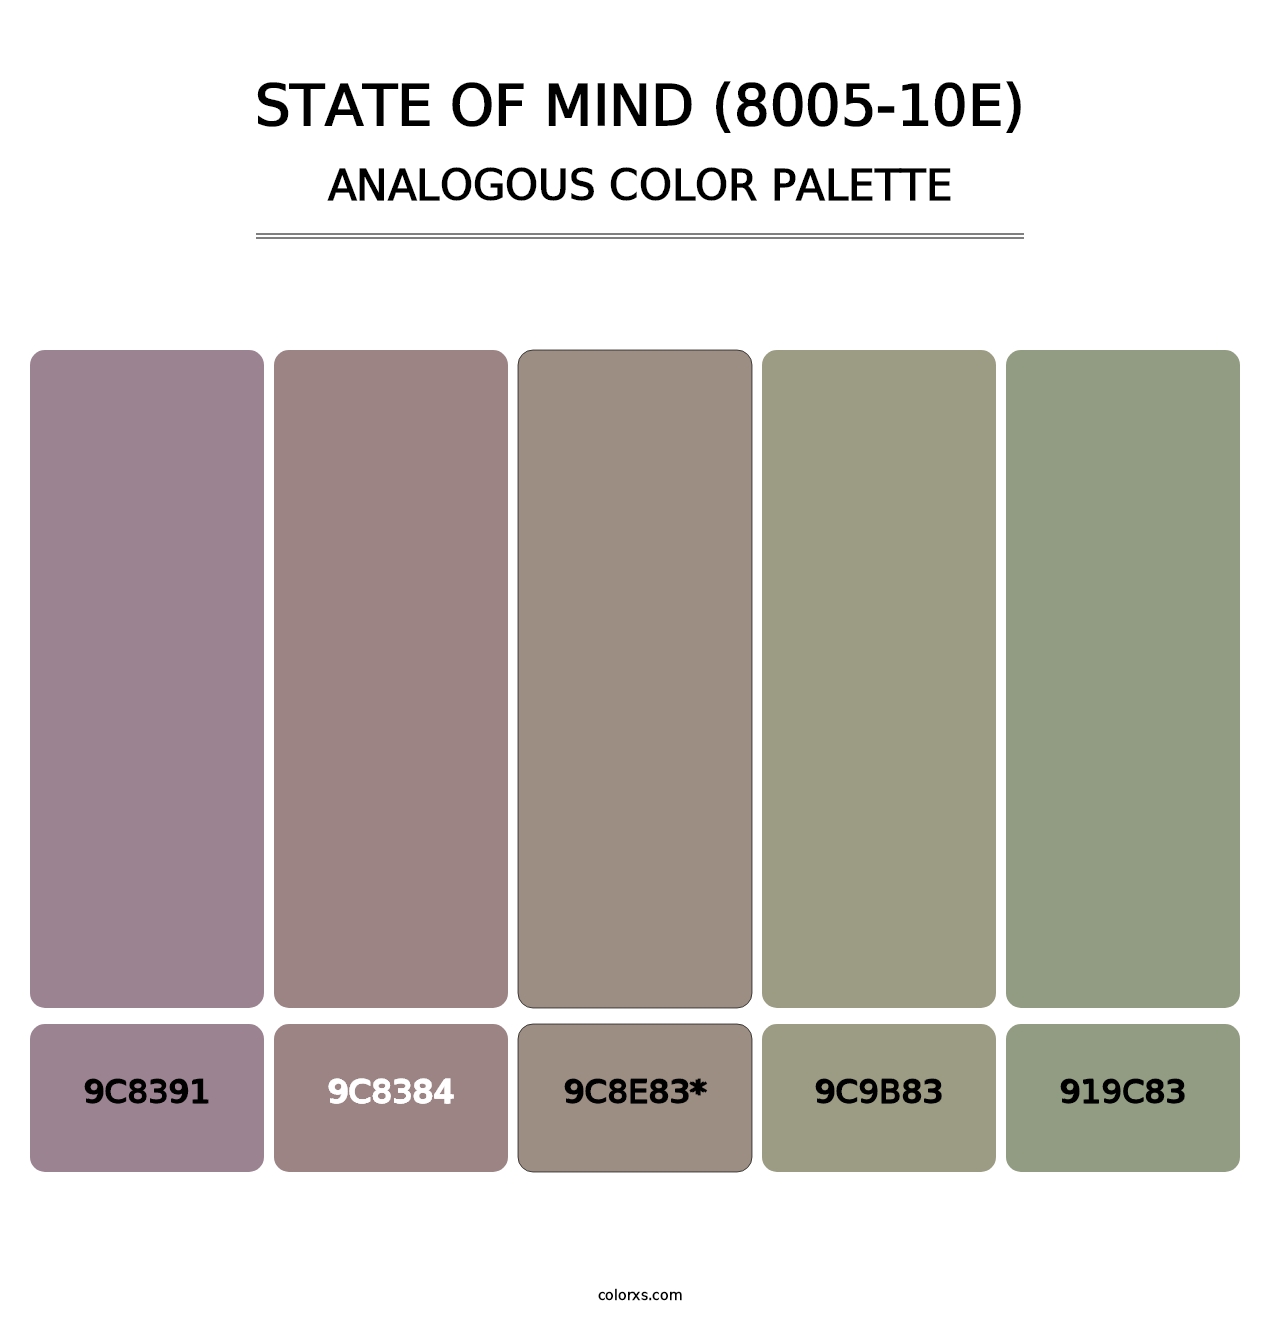 State of Mind (8005-10E) - Analogous Color Palette